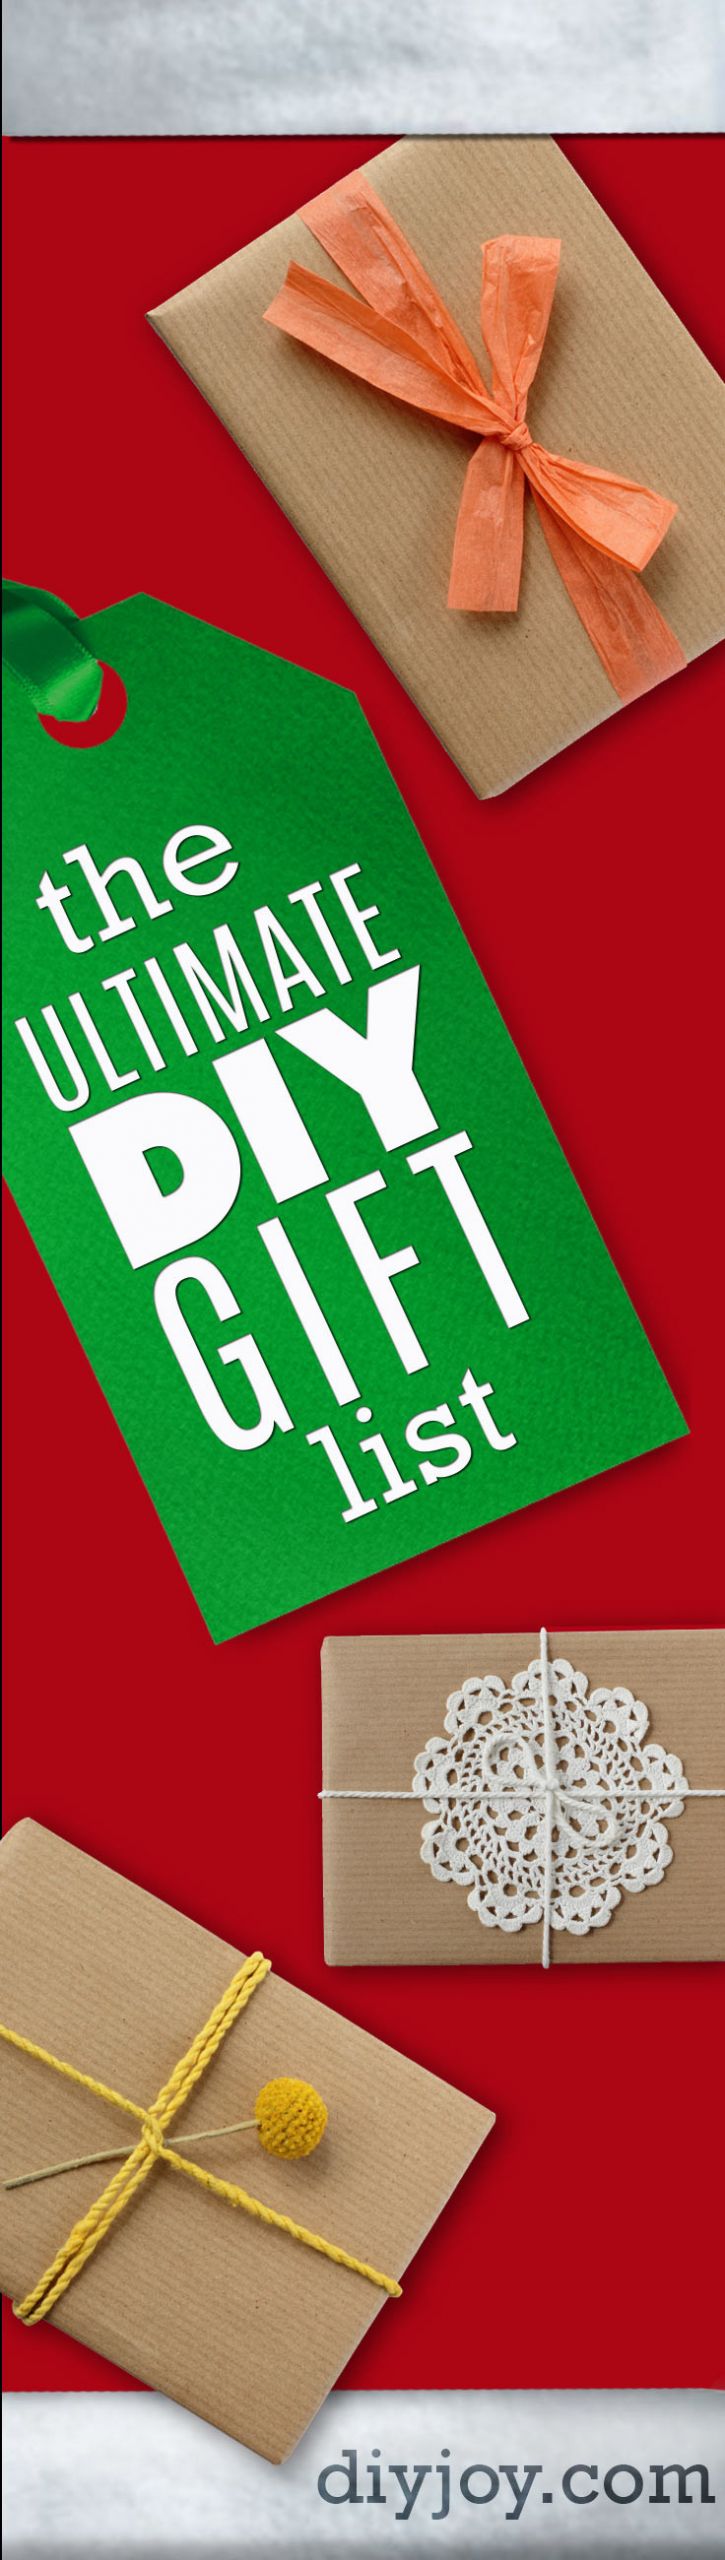 Christmas Gift Ideas For Girlfriend Pinterest
 The Ultimate DIY Christmas Gifts list